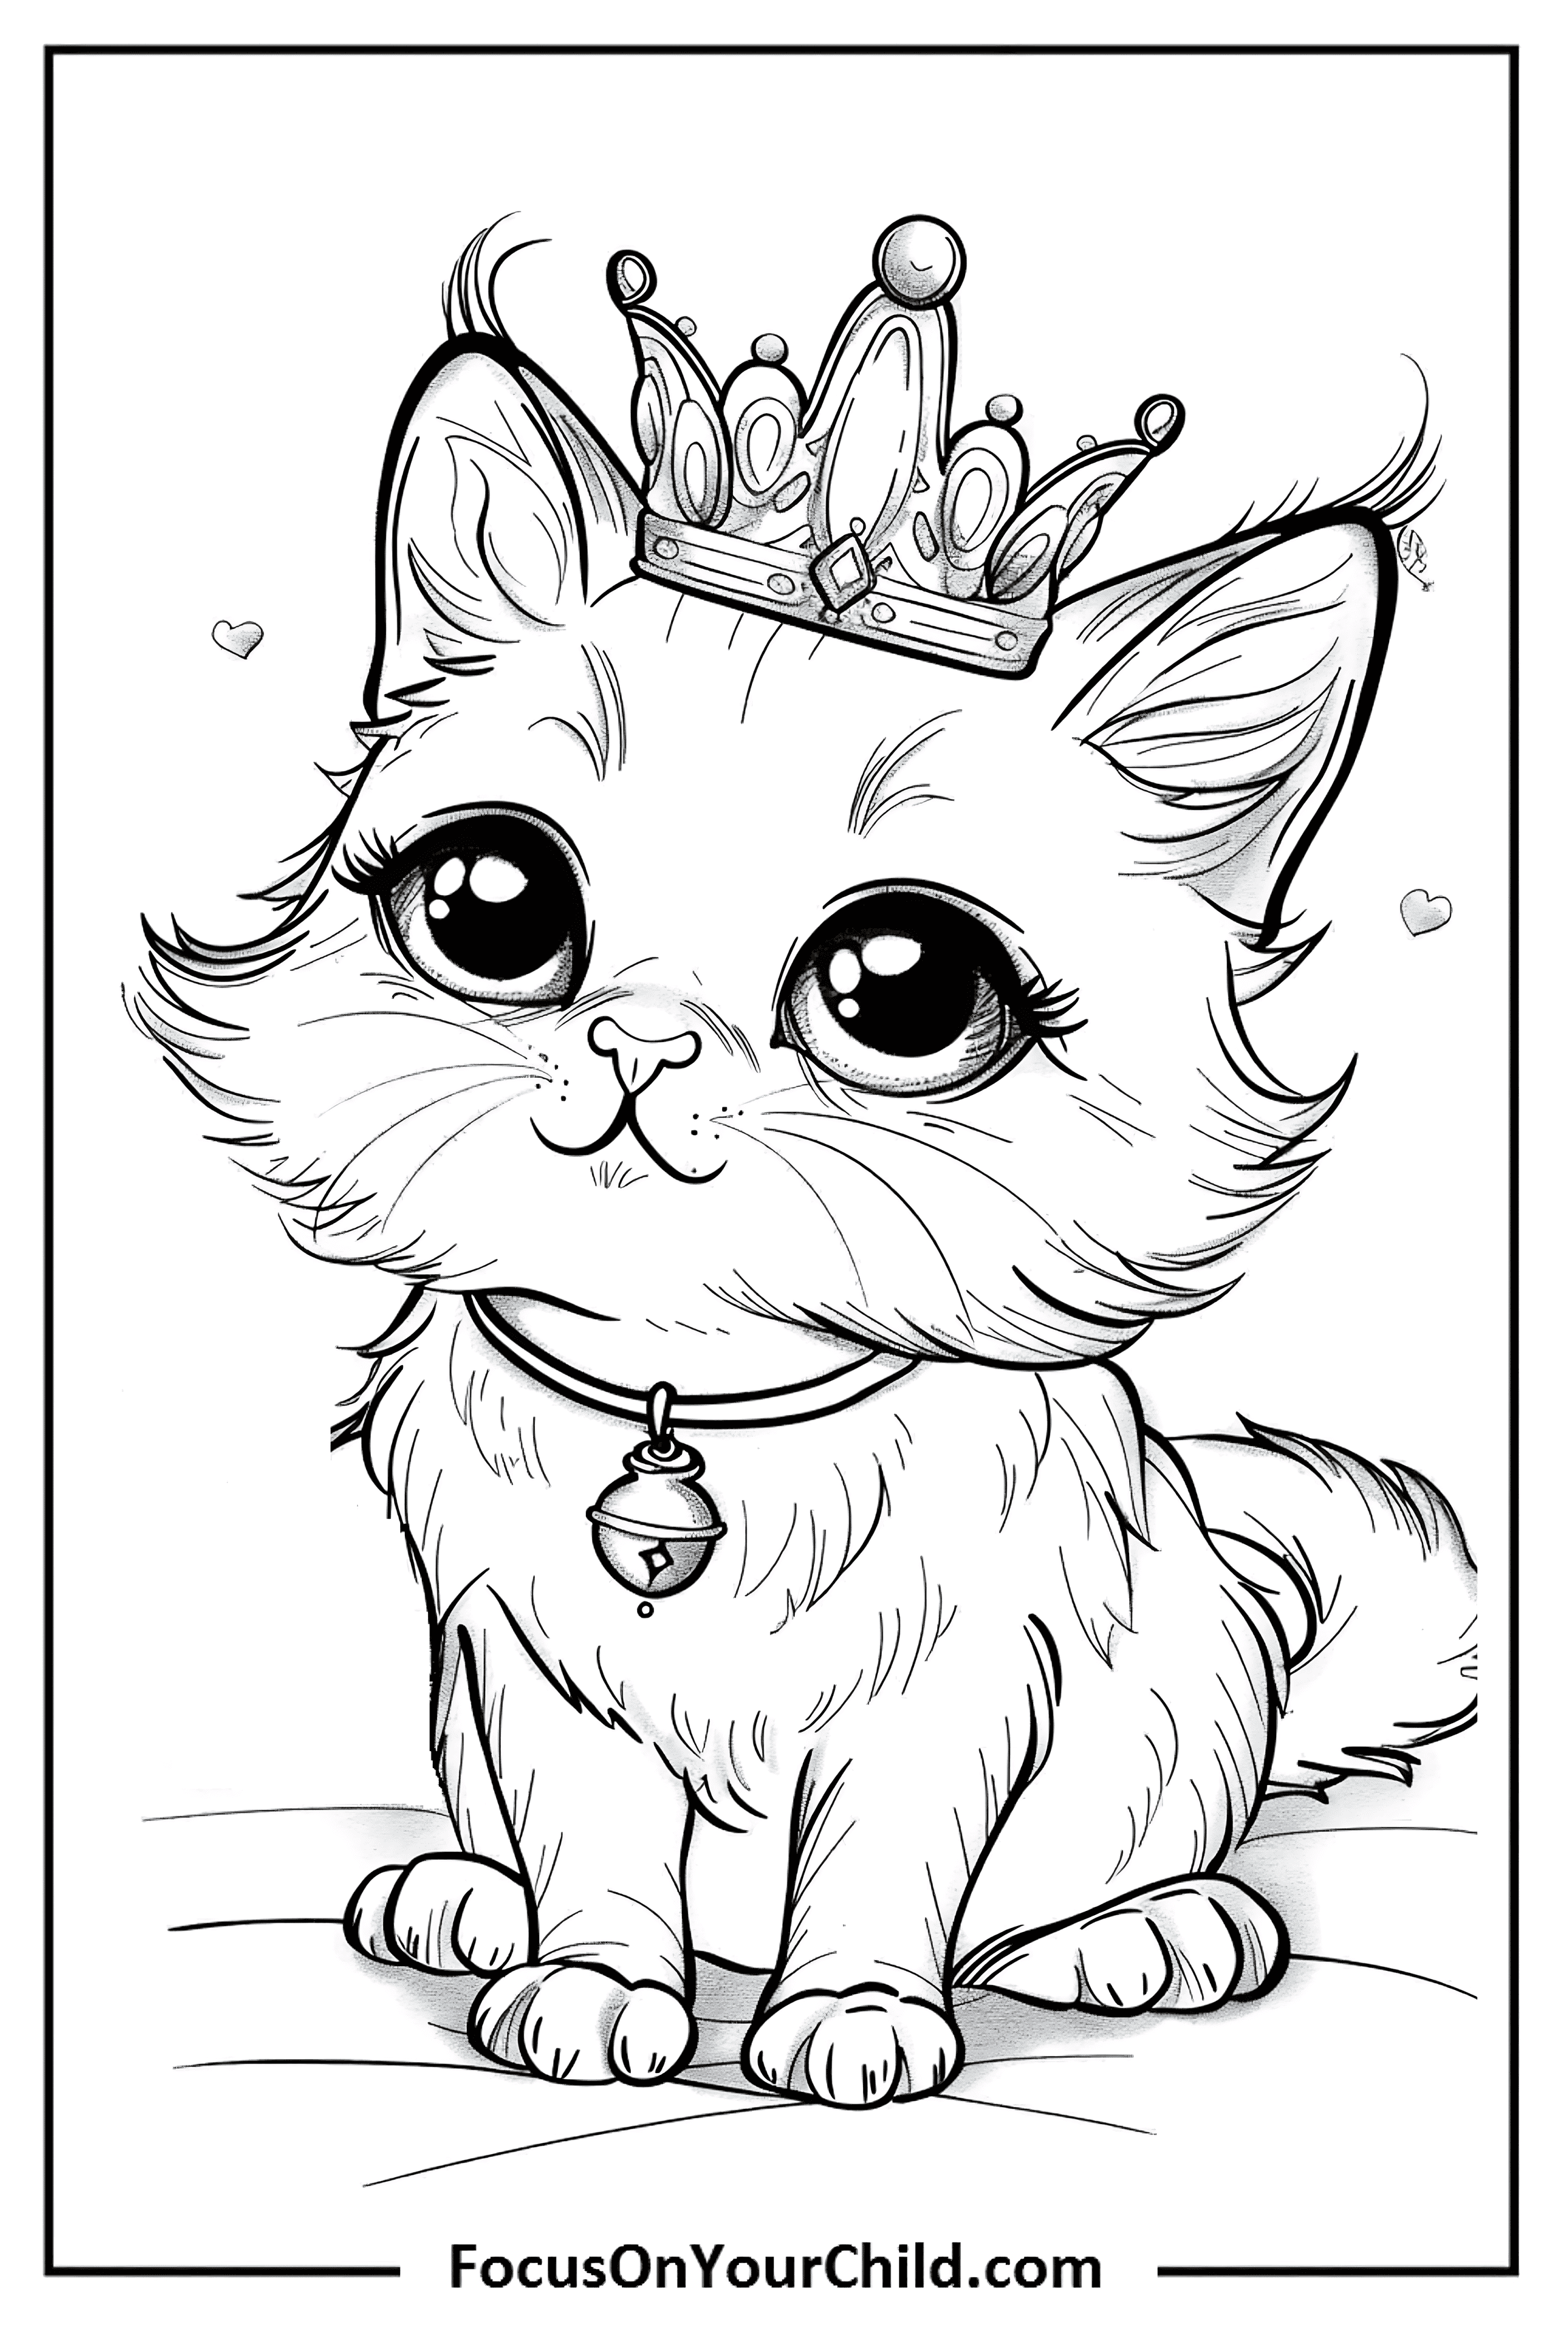 Adorable cartoon kitten wearing a royal crown and bell collar on white background.